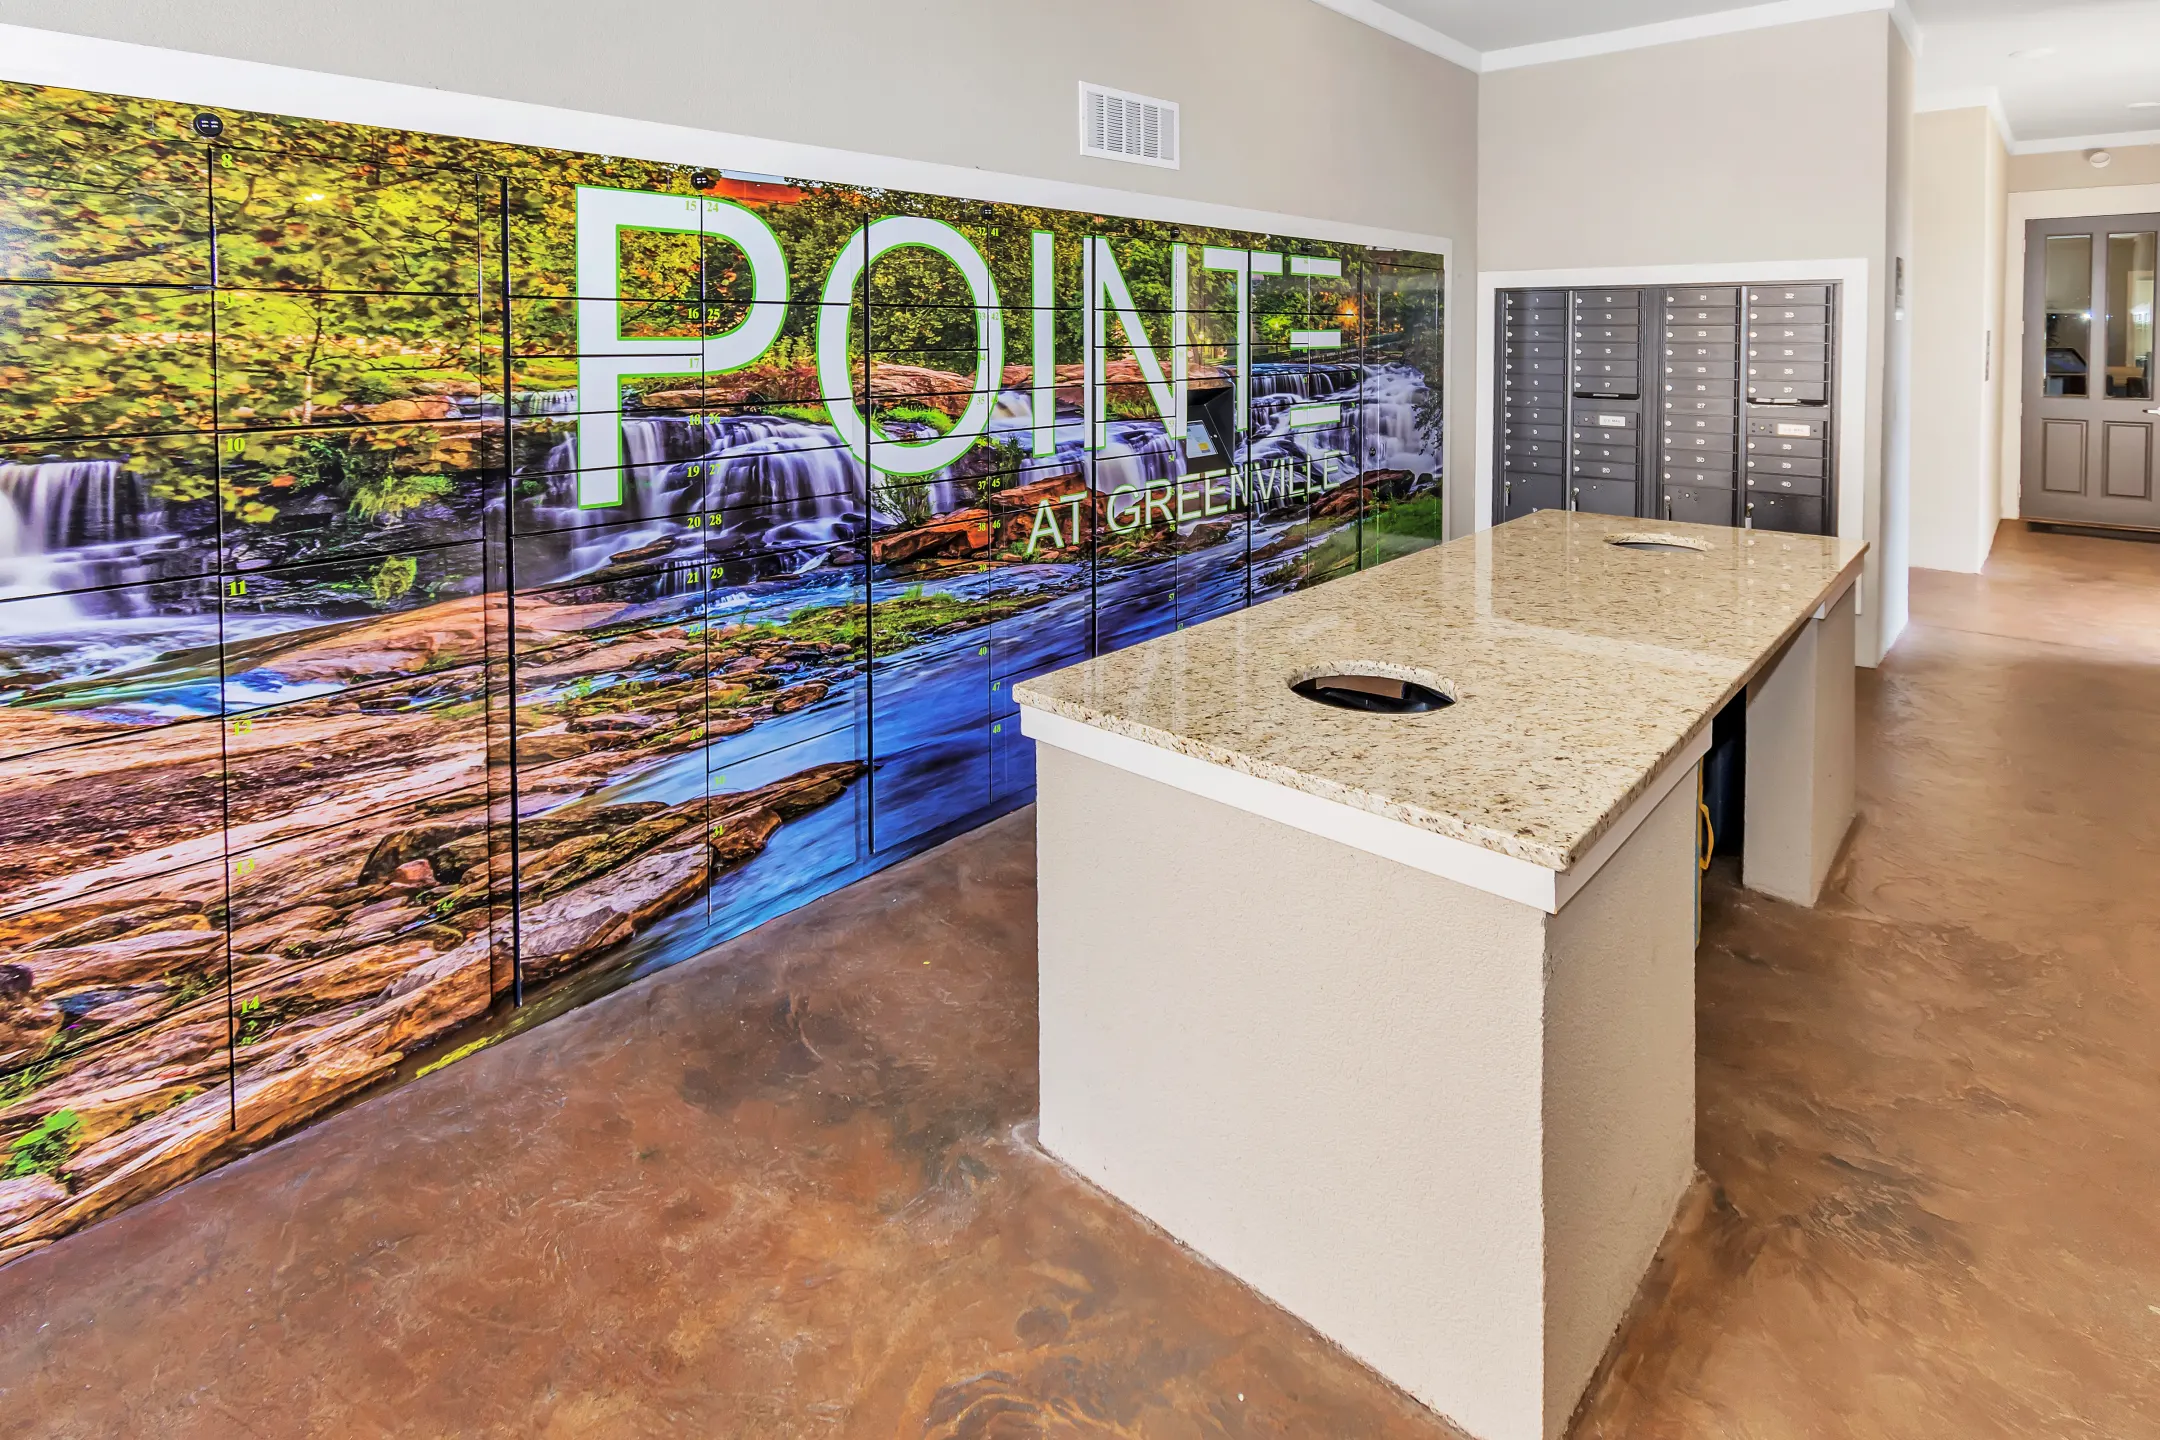 Pointe at Greenville Apartments - Greenville, SC